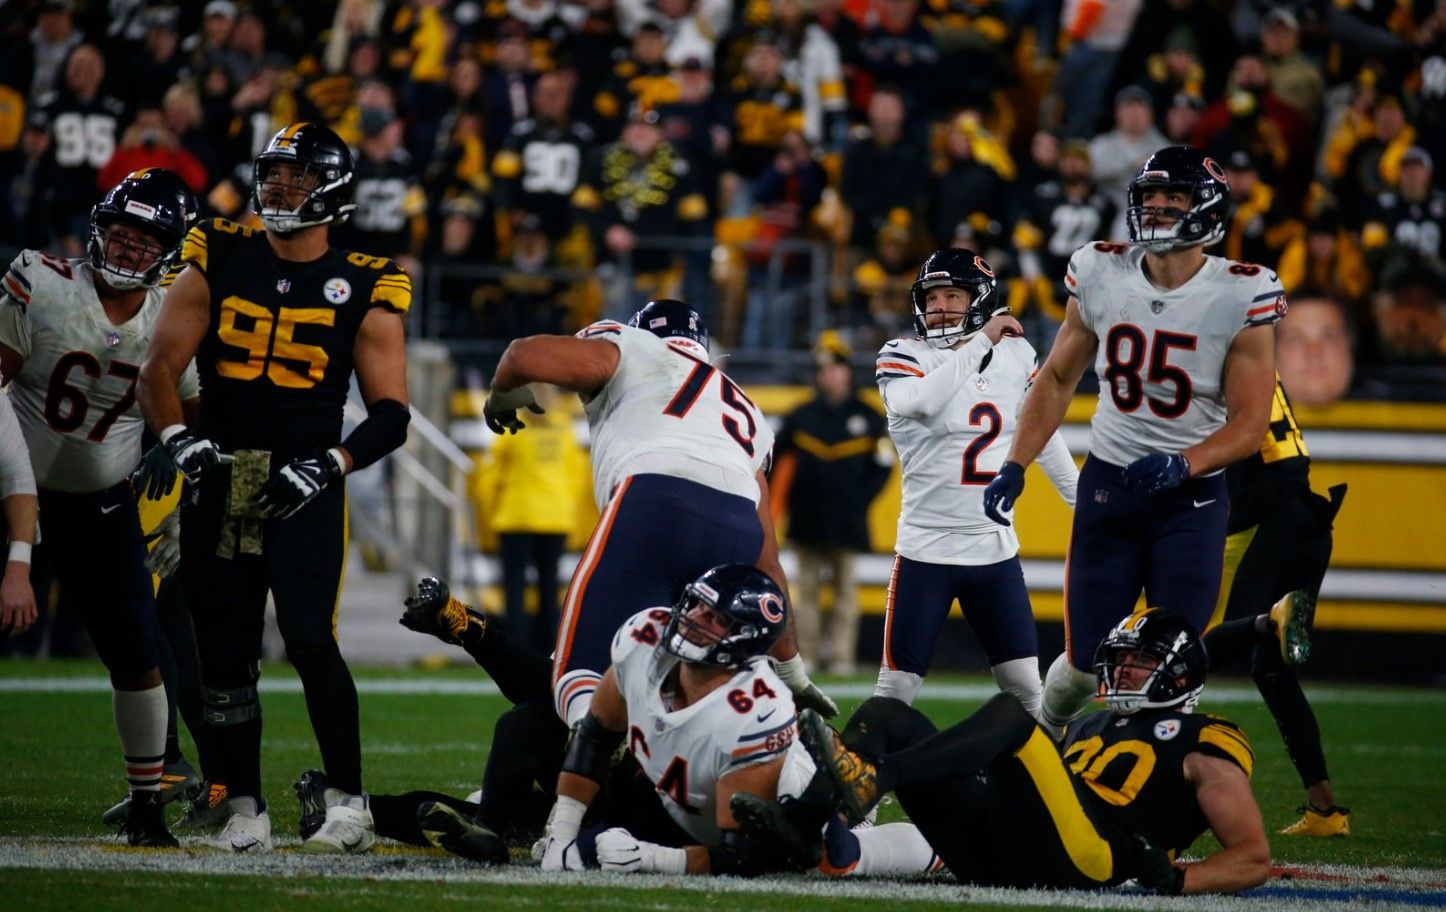 Bears fall short on Monday Night Football, lose to Steelers 29-27